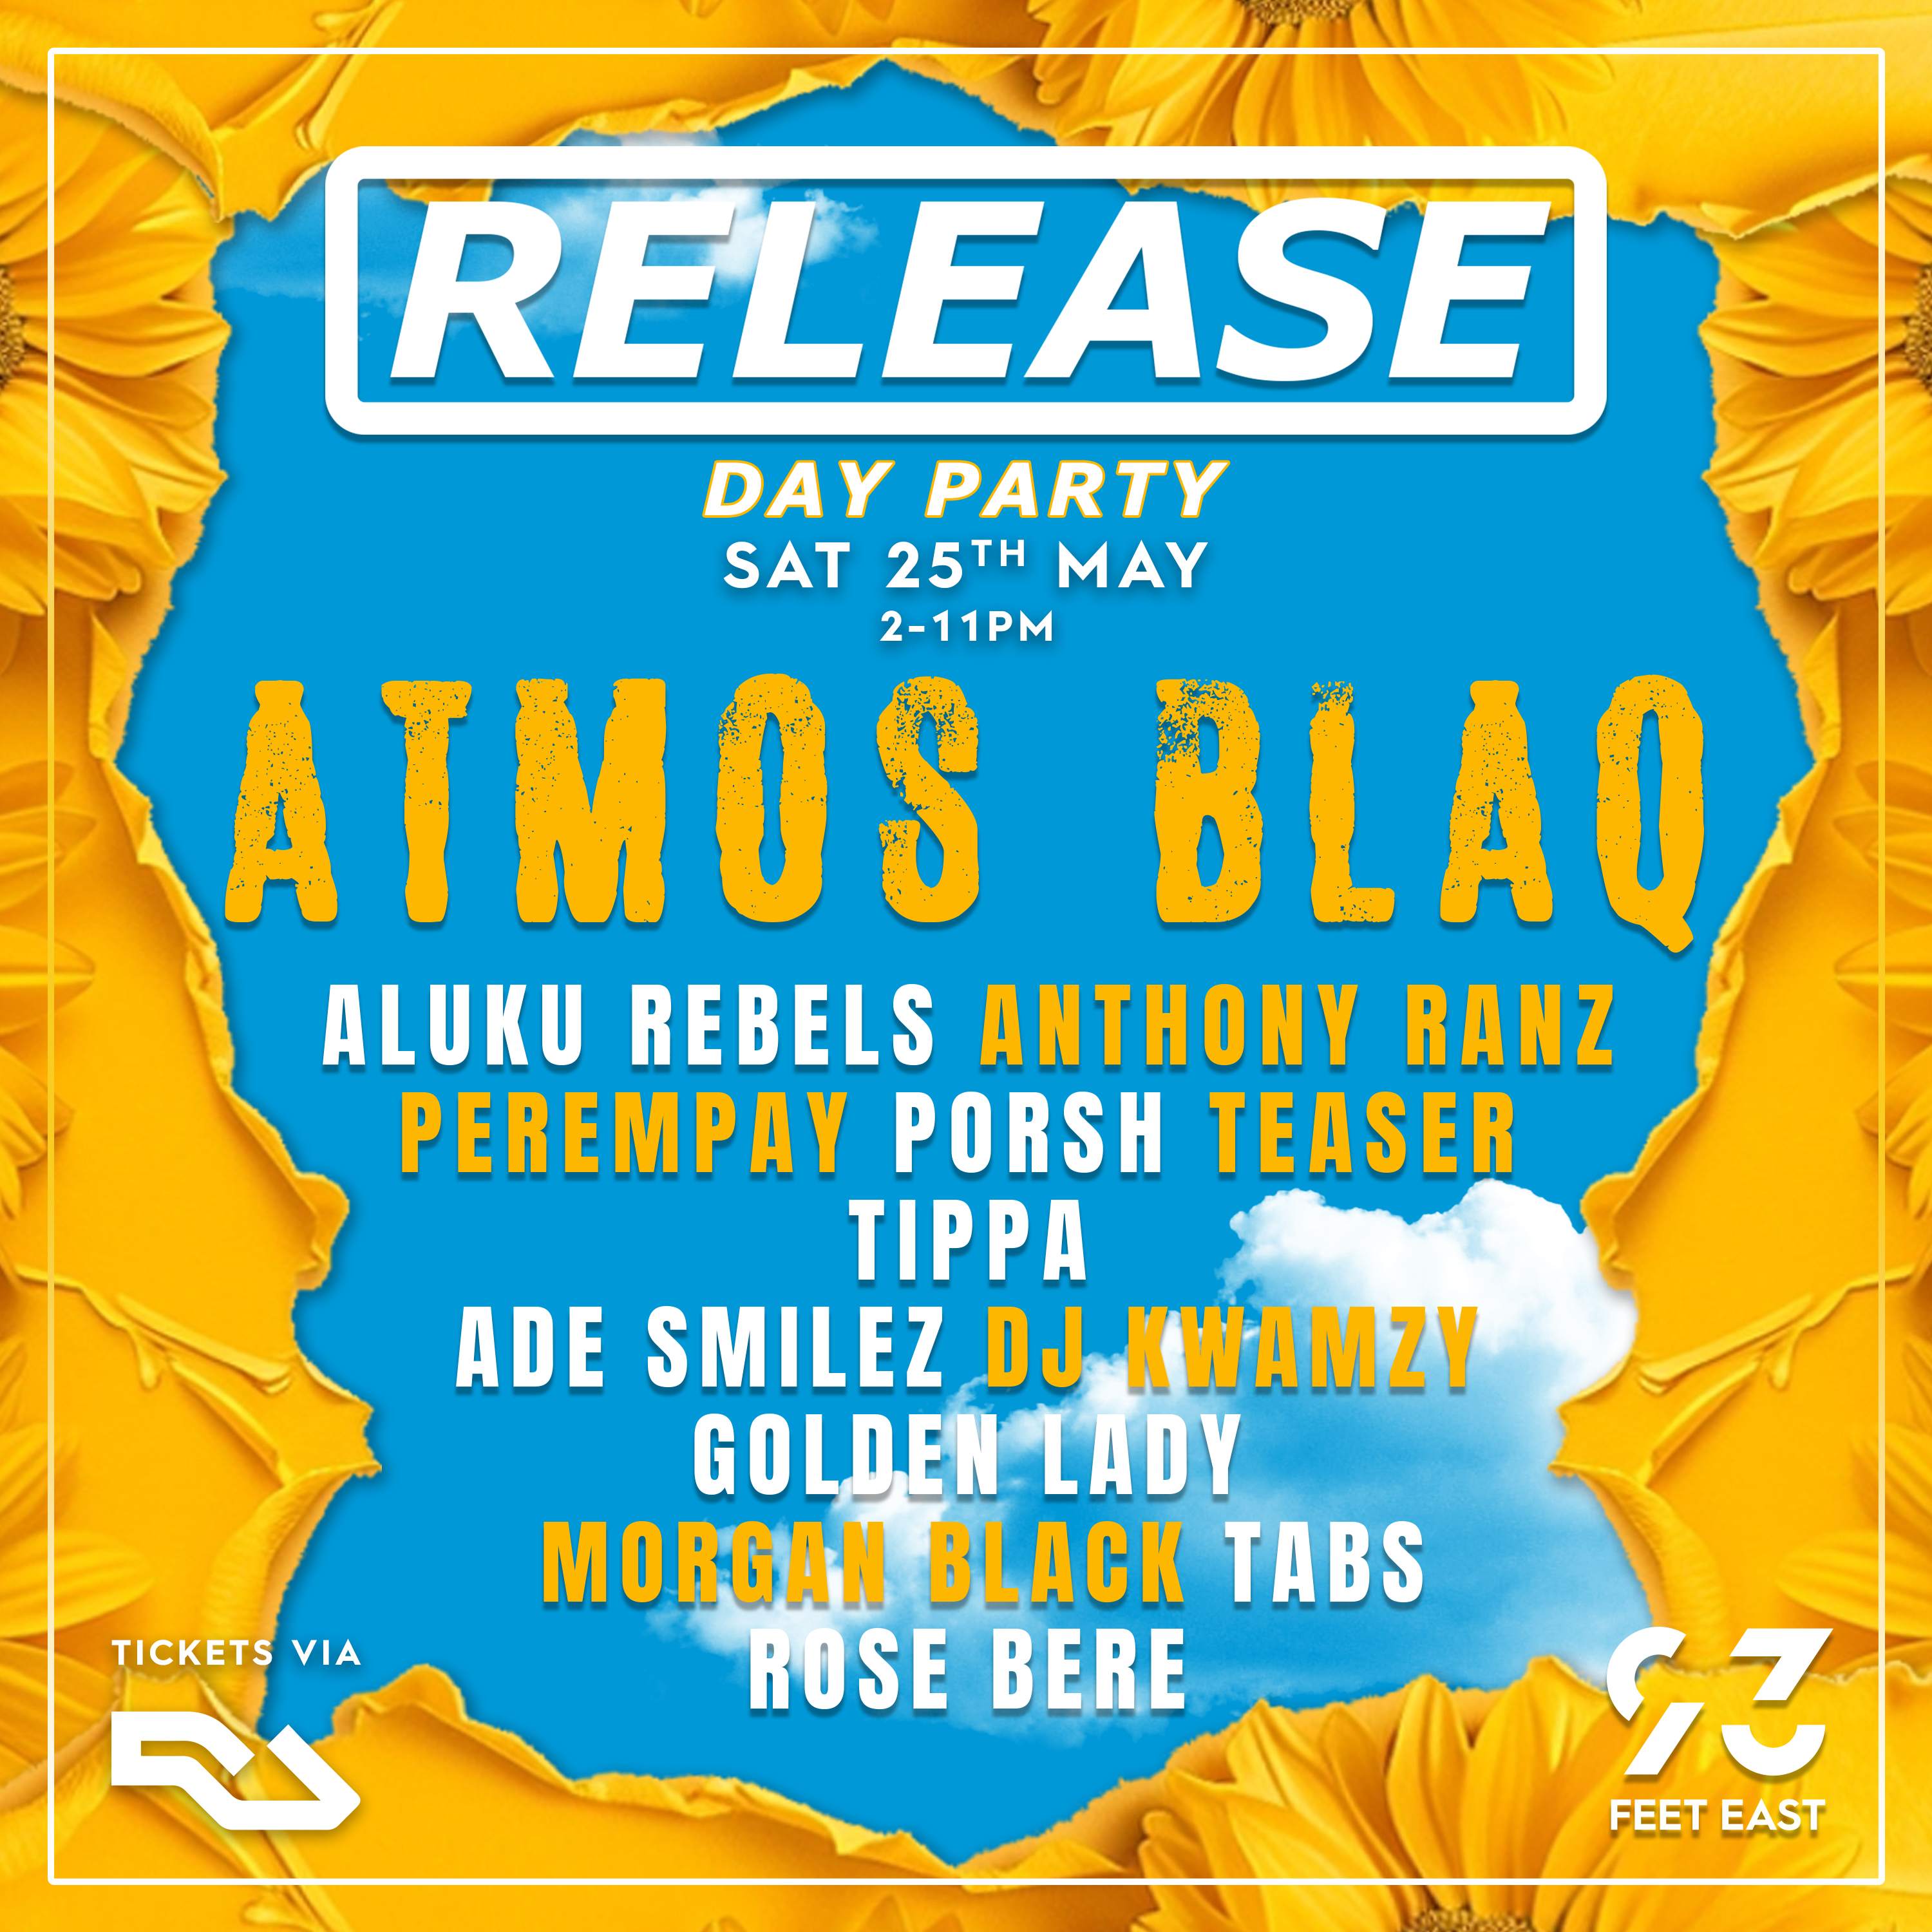 Release Day Party presents Atmos Blaq  - フライヤー裏